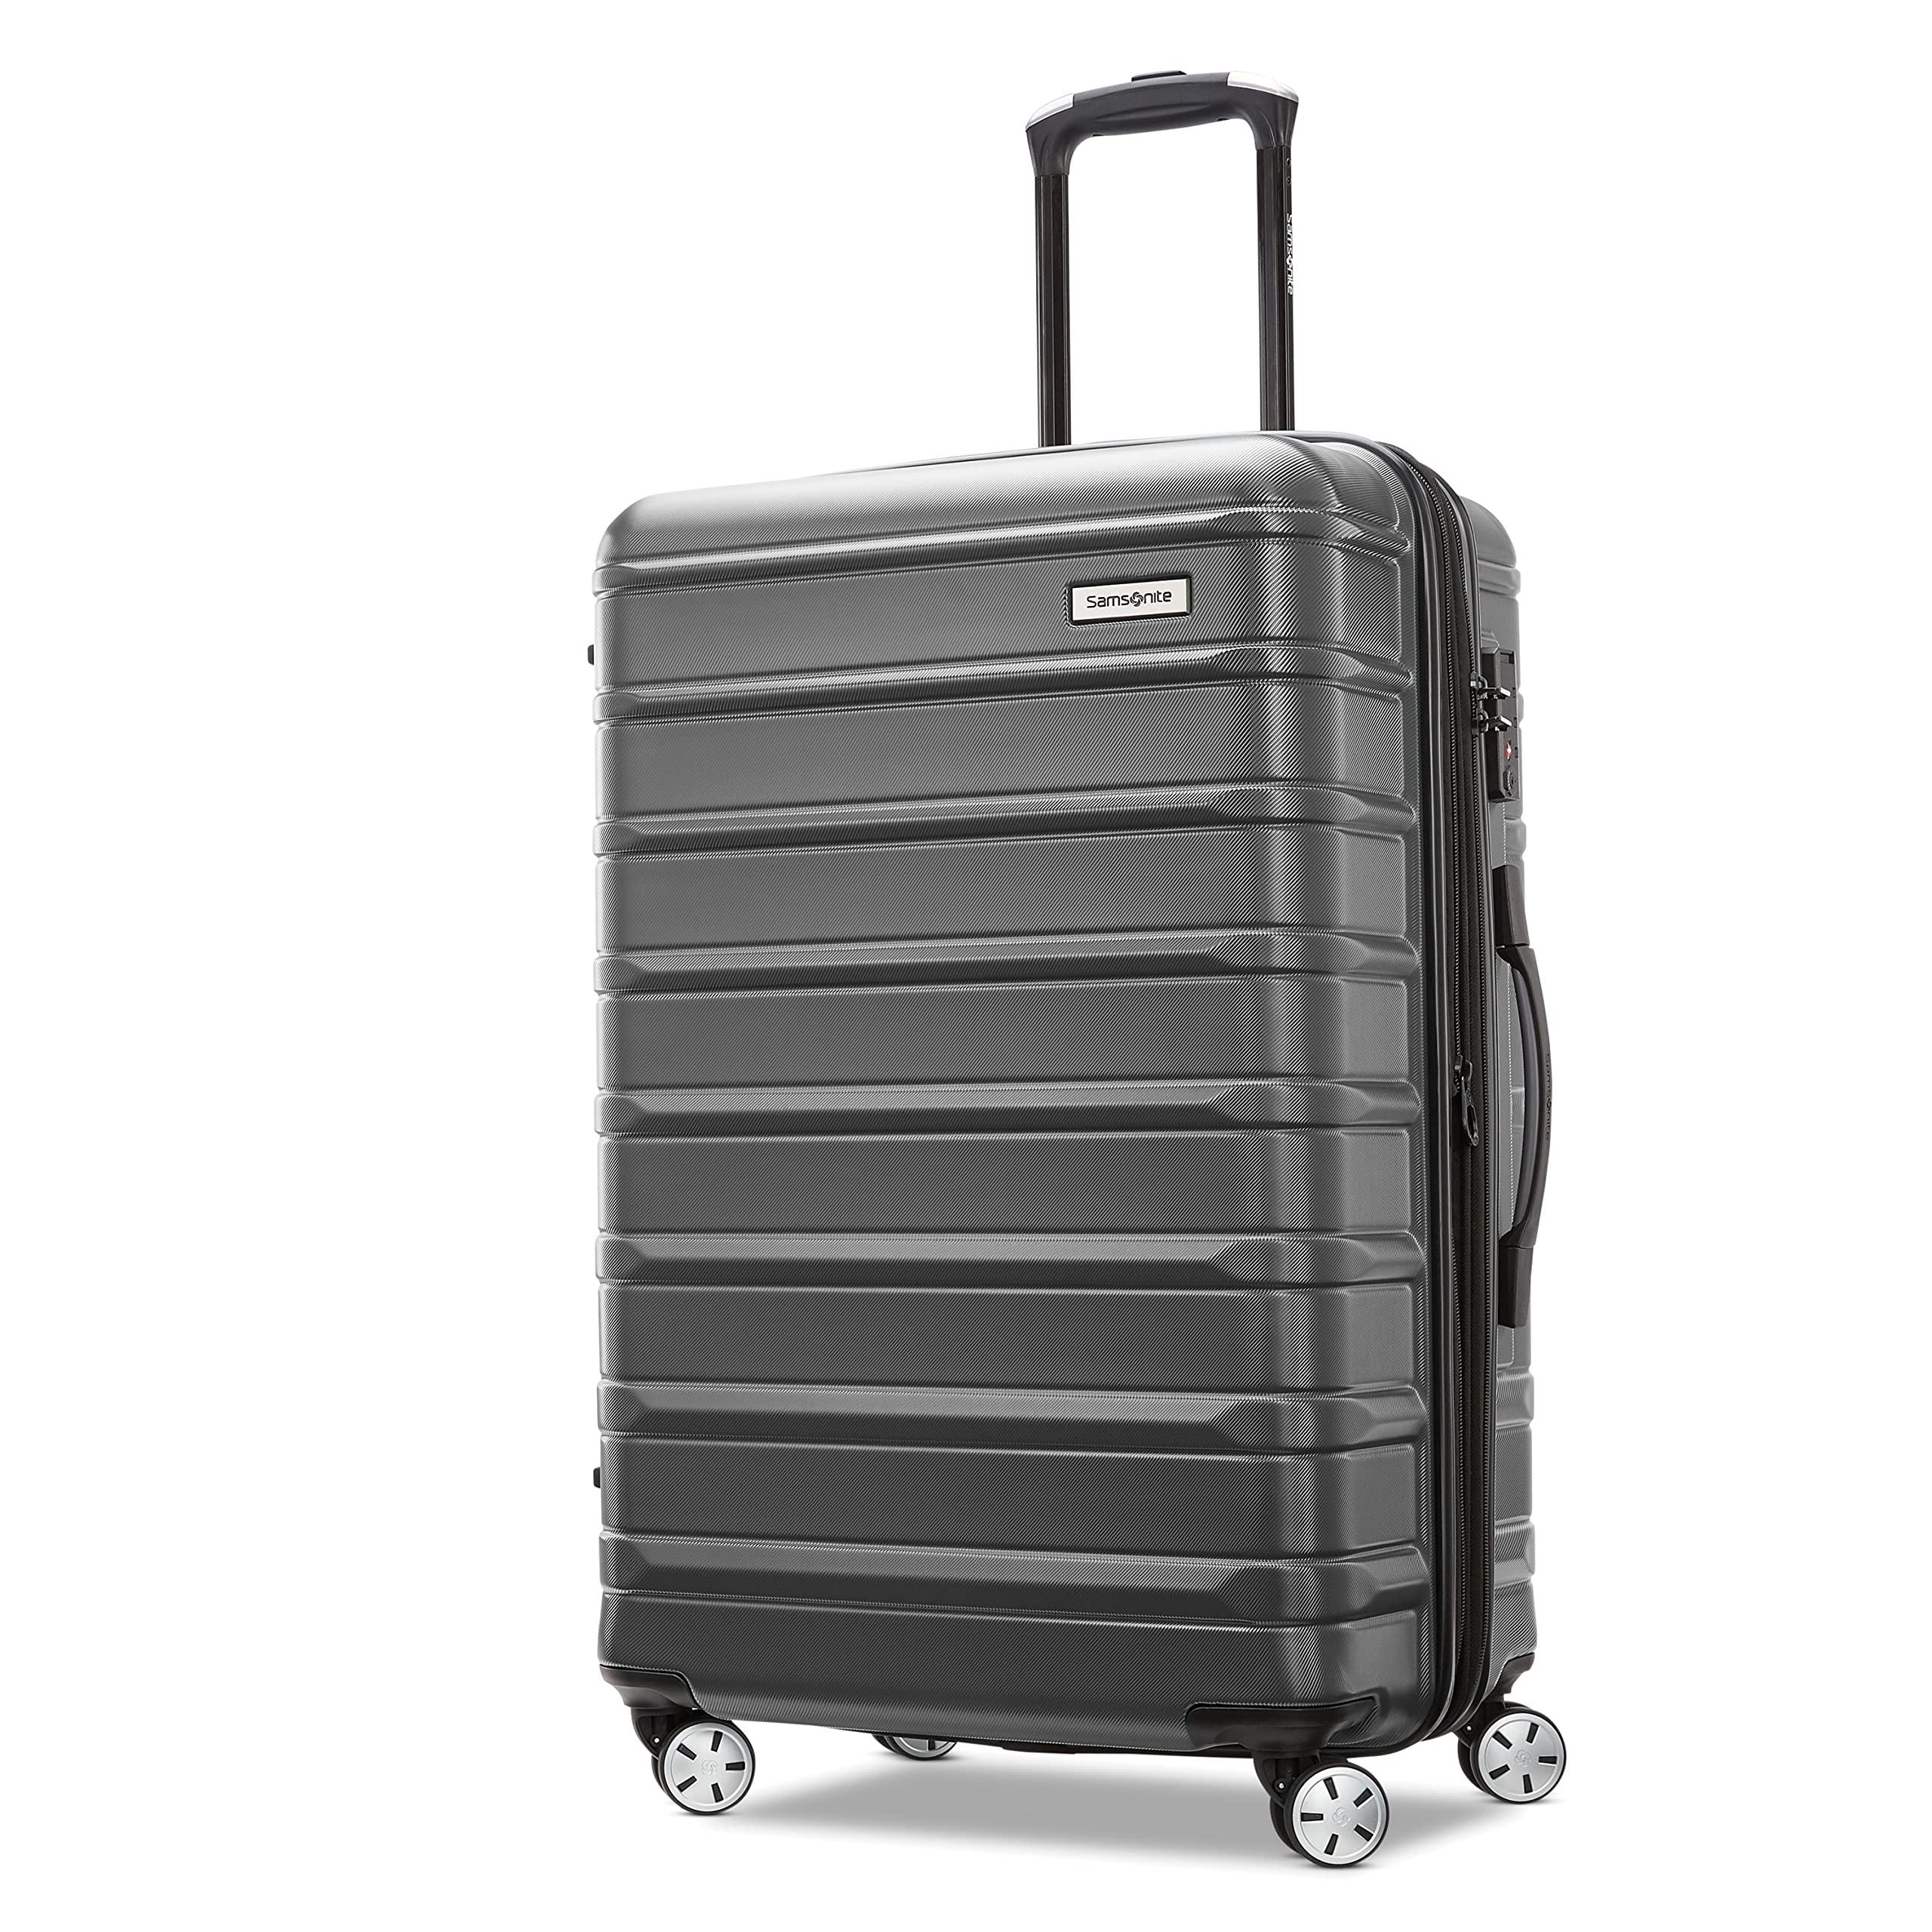 Samsonite Omni 2 Hardside Expandable Luggage With Spinner Wheels in Gray |  Lyst